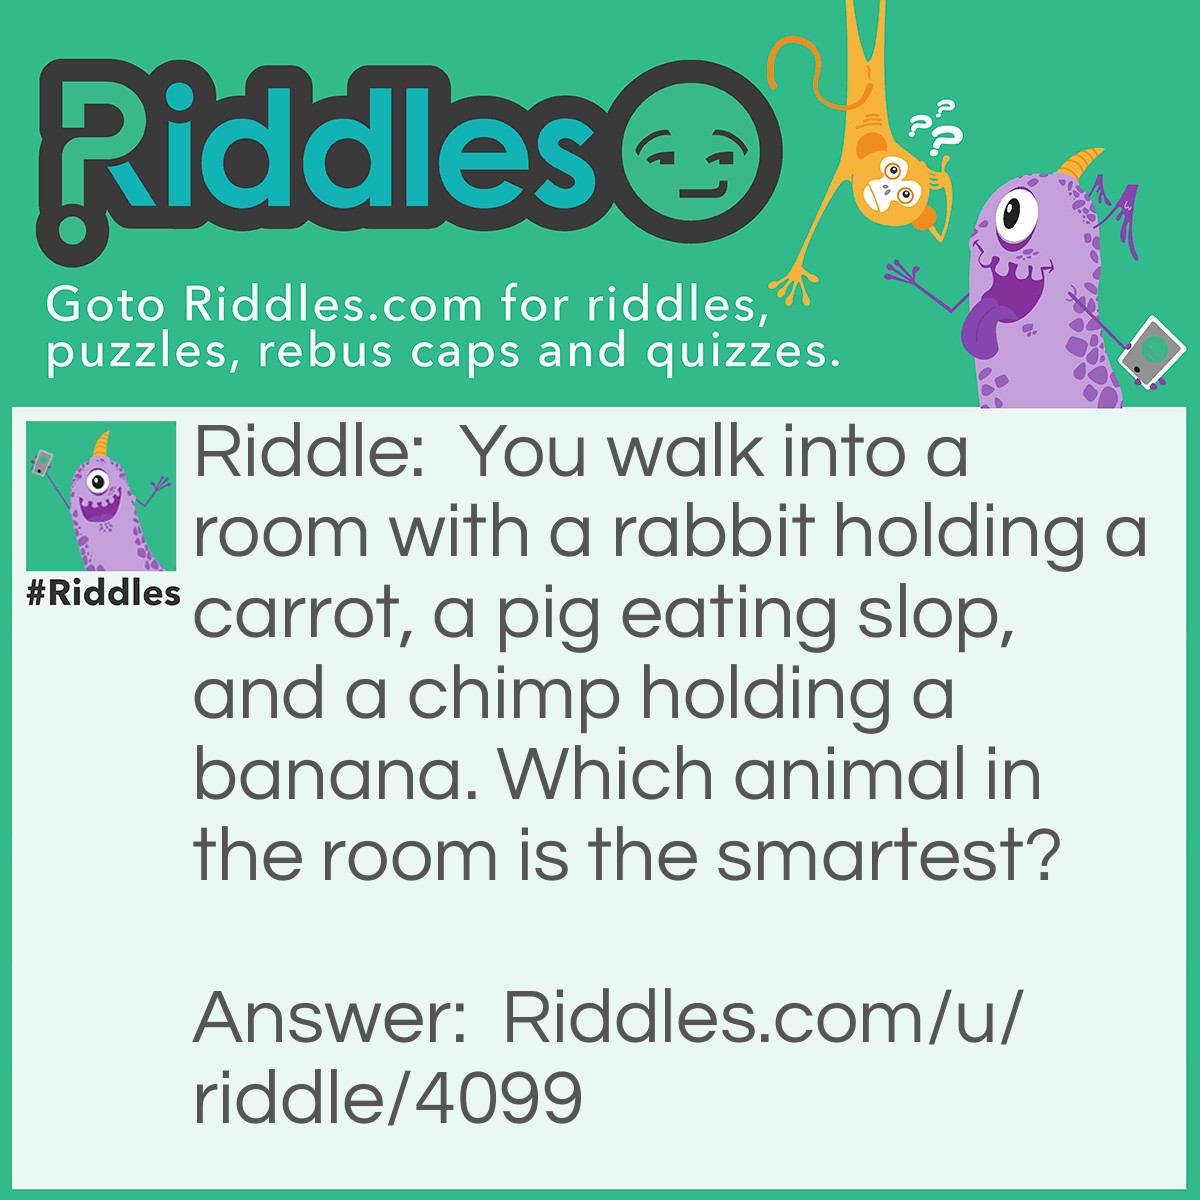 Riddle: You walk into a room with a rabbit holding a carrot, a pig eating slop, and a chimp holding a banana. Which animal in the room is the smartest? Answer: You, hopefully.